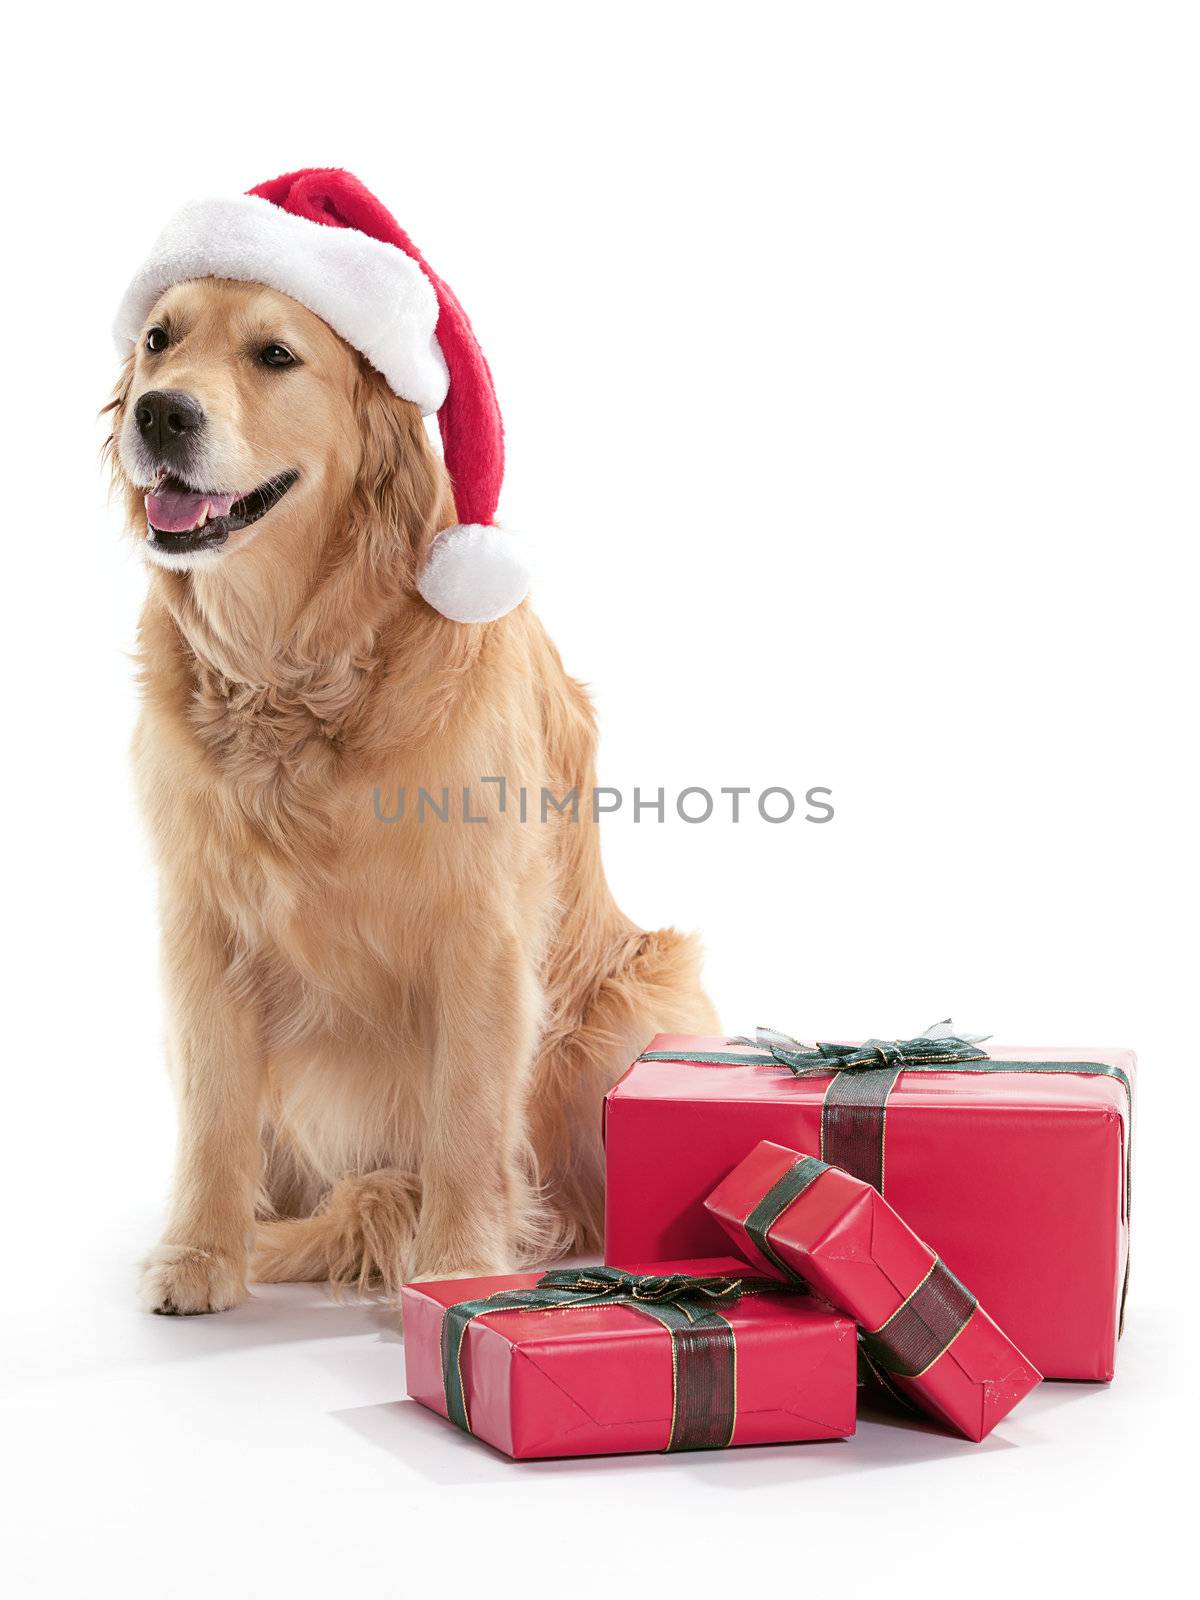 A dog wearing a Santa hat, surrounded by Christmas presents on a white background.